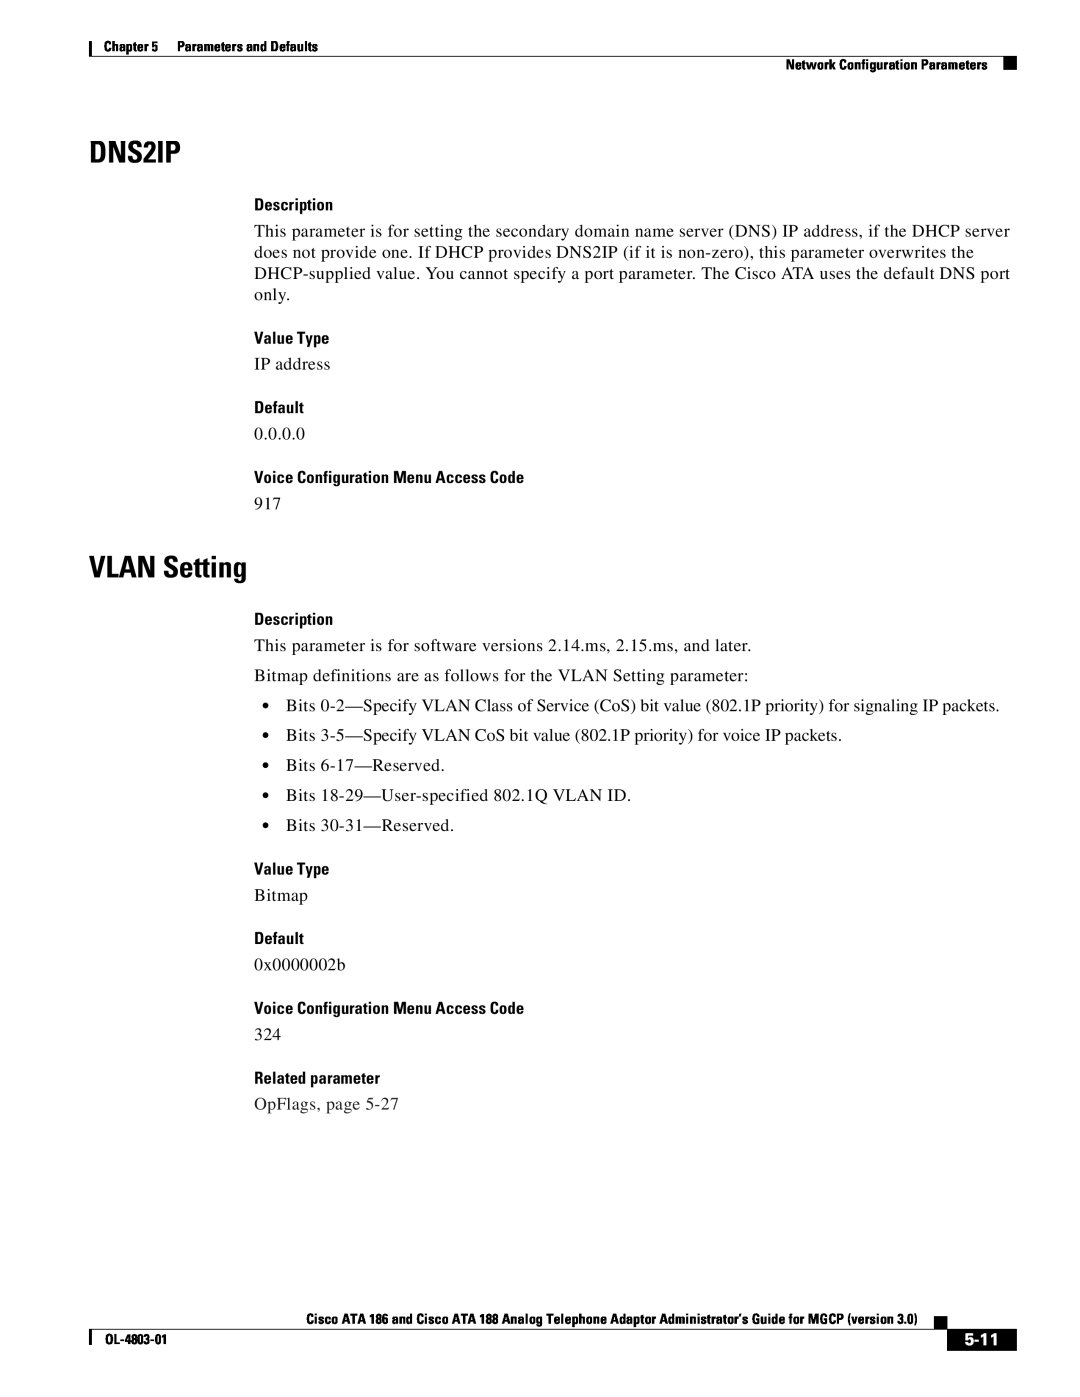 Cisco Systems ATA 188 manual DNS2IP, VLAN Setting, Related parameter, 5-11, Description, Value Type, Default, OpFlags, page 